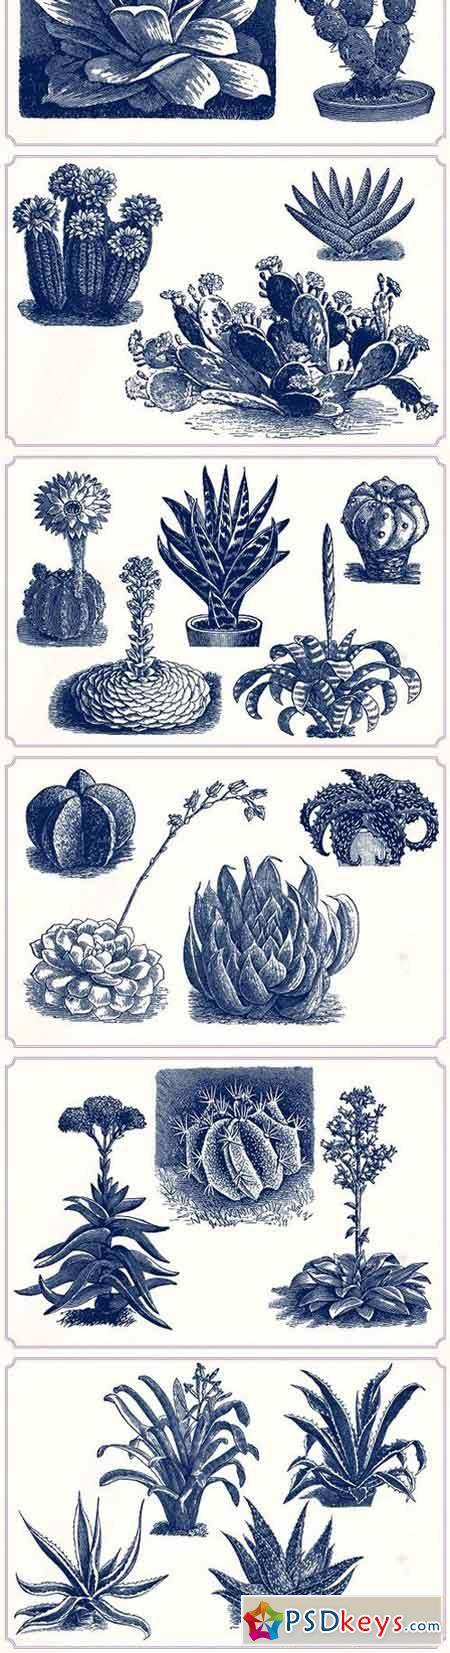 Vintage Cacti and Succulents 1288797